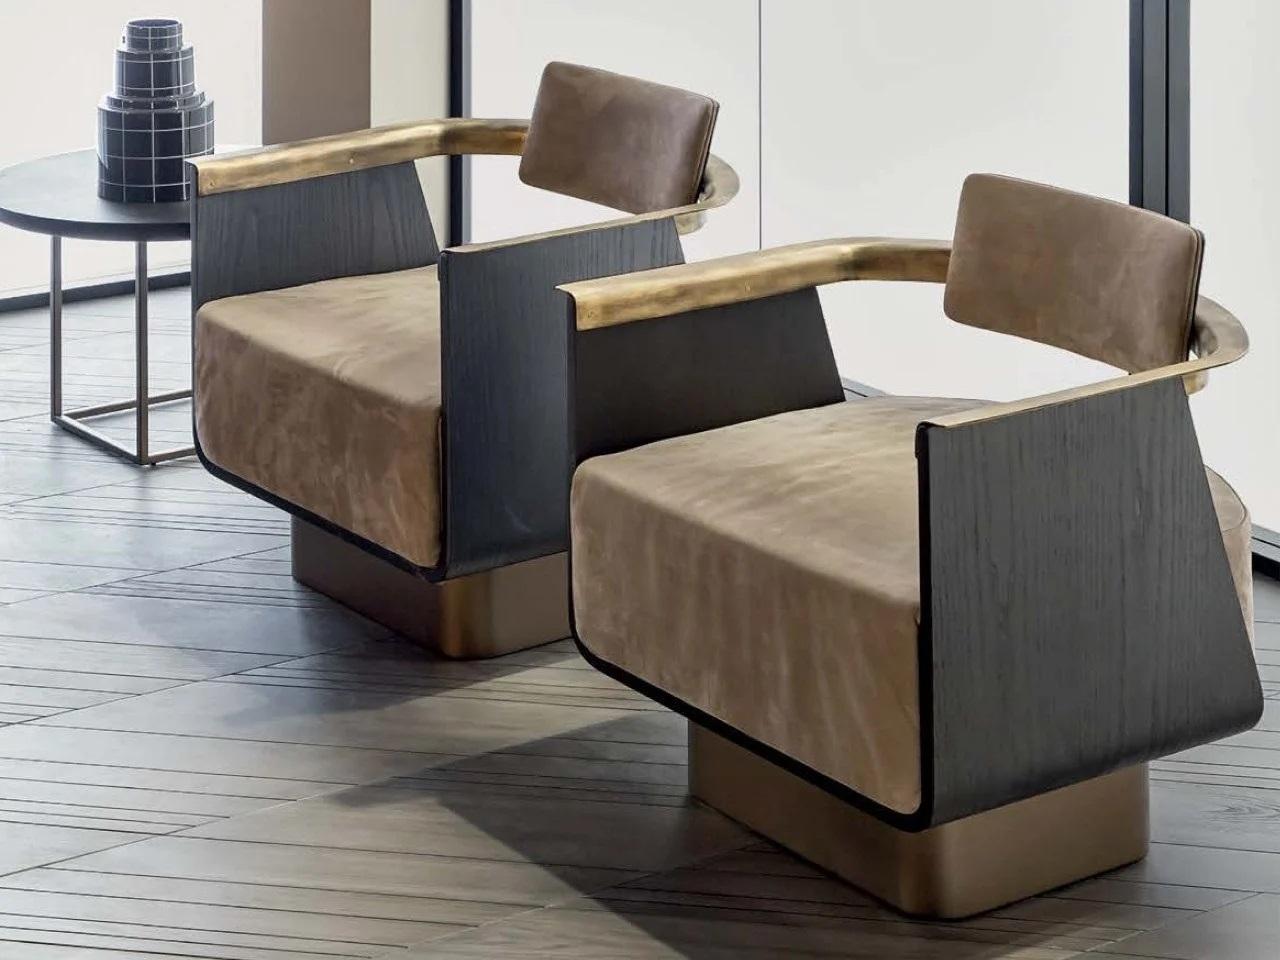 Structure in curved Ash wood, wooden base, curved back in ash plywood with upholstered and covered front, armrests in burnished brass. Seat upholstered in differentiated density polyurethane foam with acrylic fiber covering. Back upholstered in